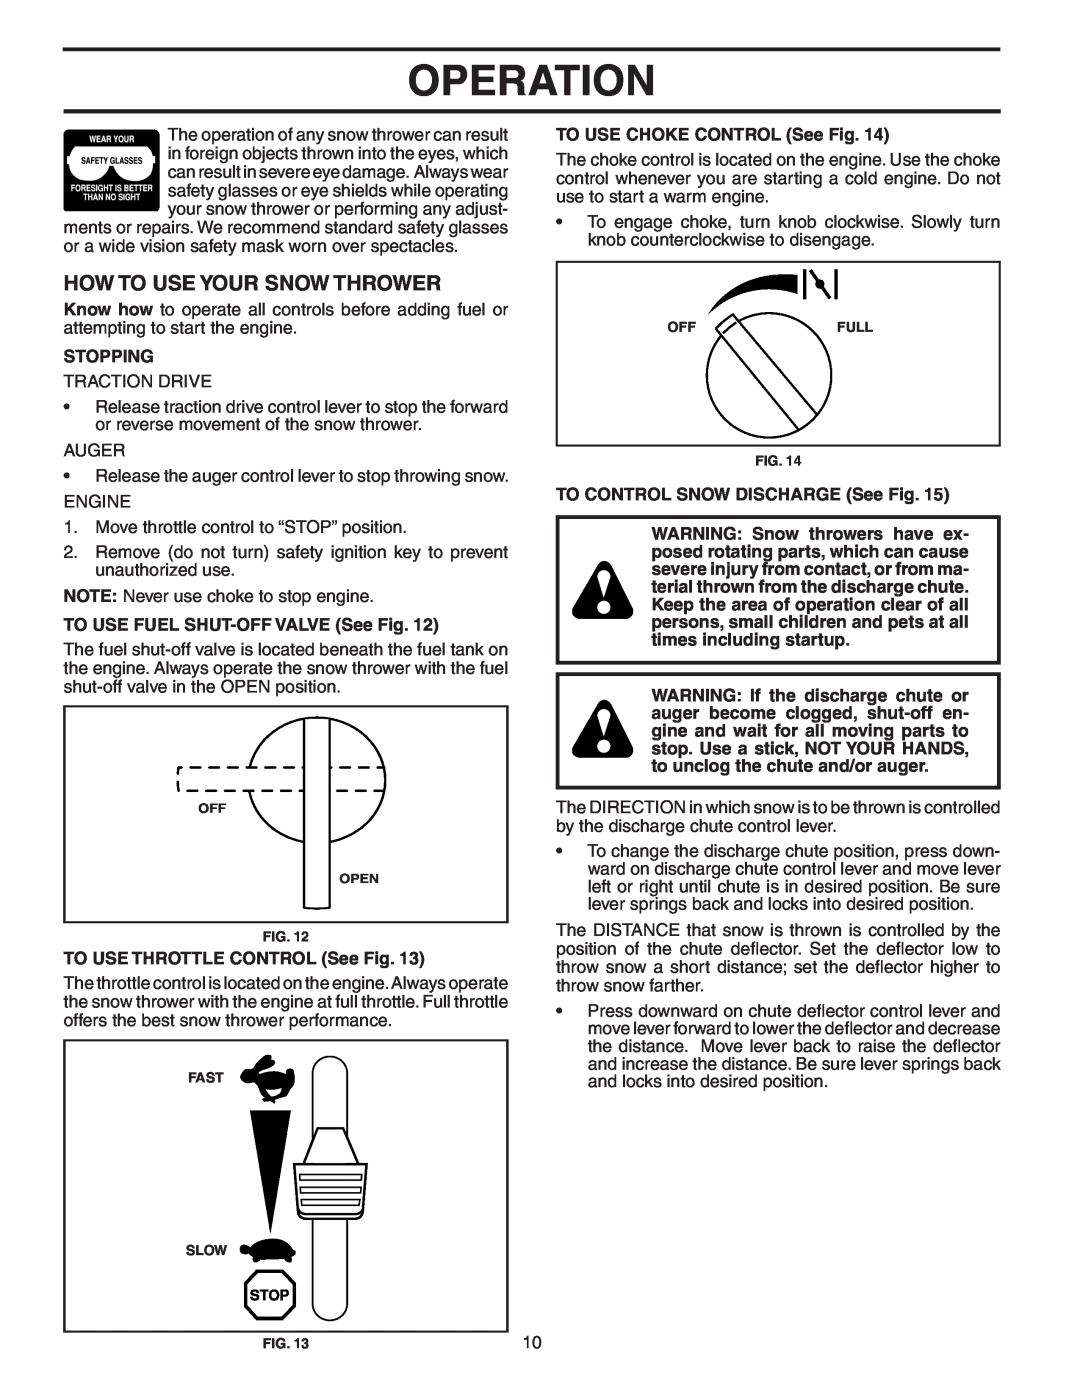 Poulan 183615 owner manual Operation, How To Use Your Snow Thrower, Stopping, TO USE FUEL SHUT-OFFVALVE See Fig 